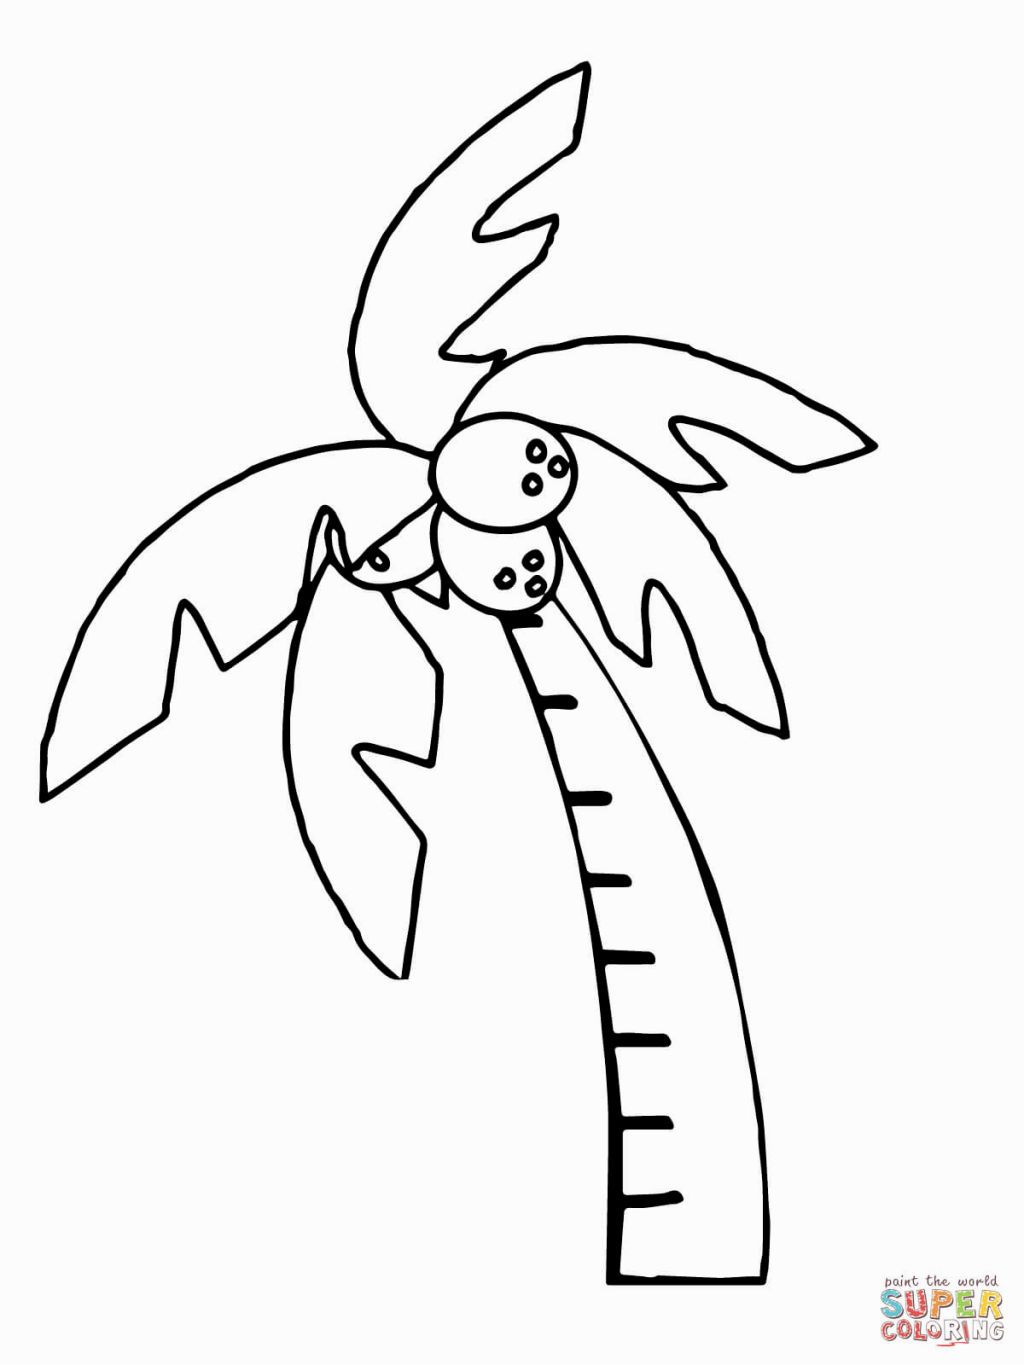 Palm Tree Coloring Page | Coloring Pages